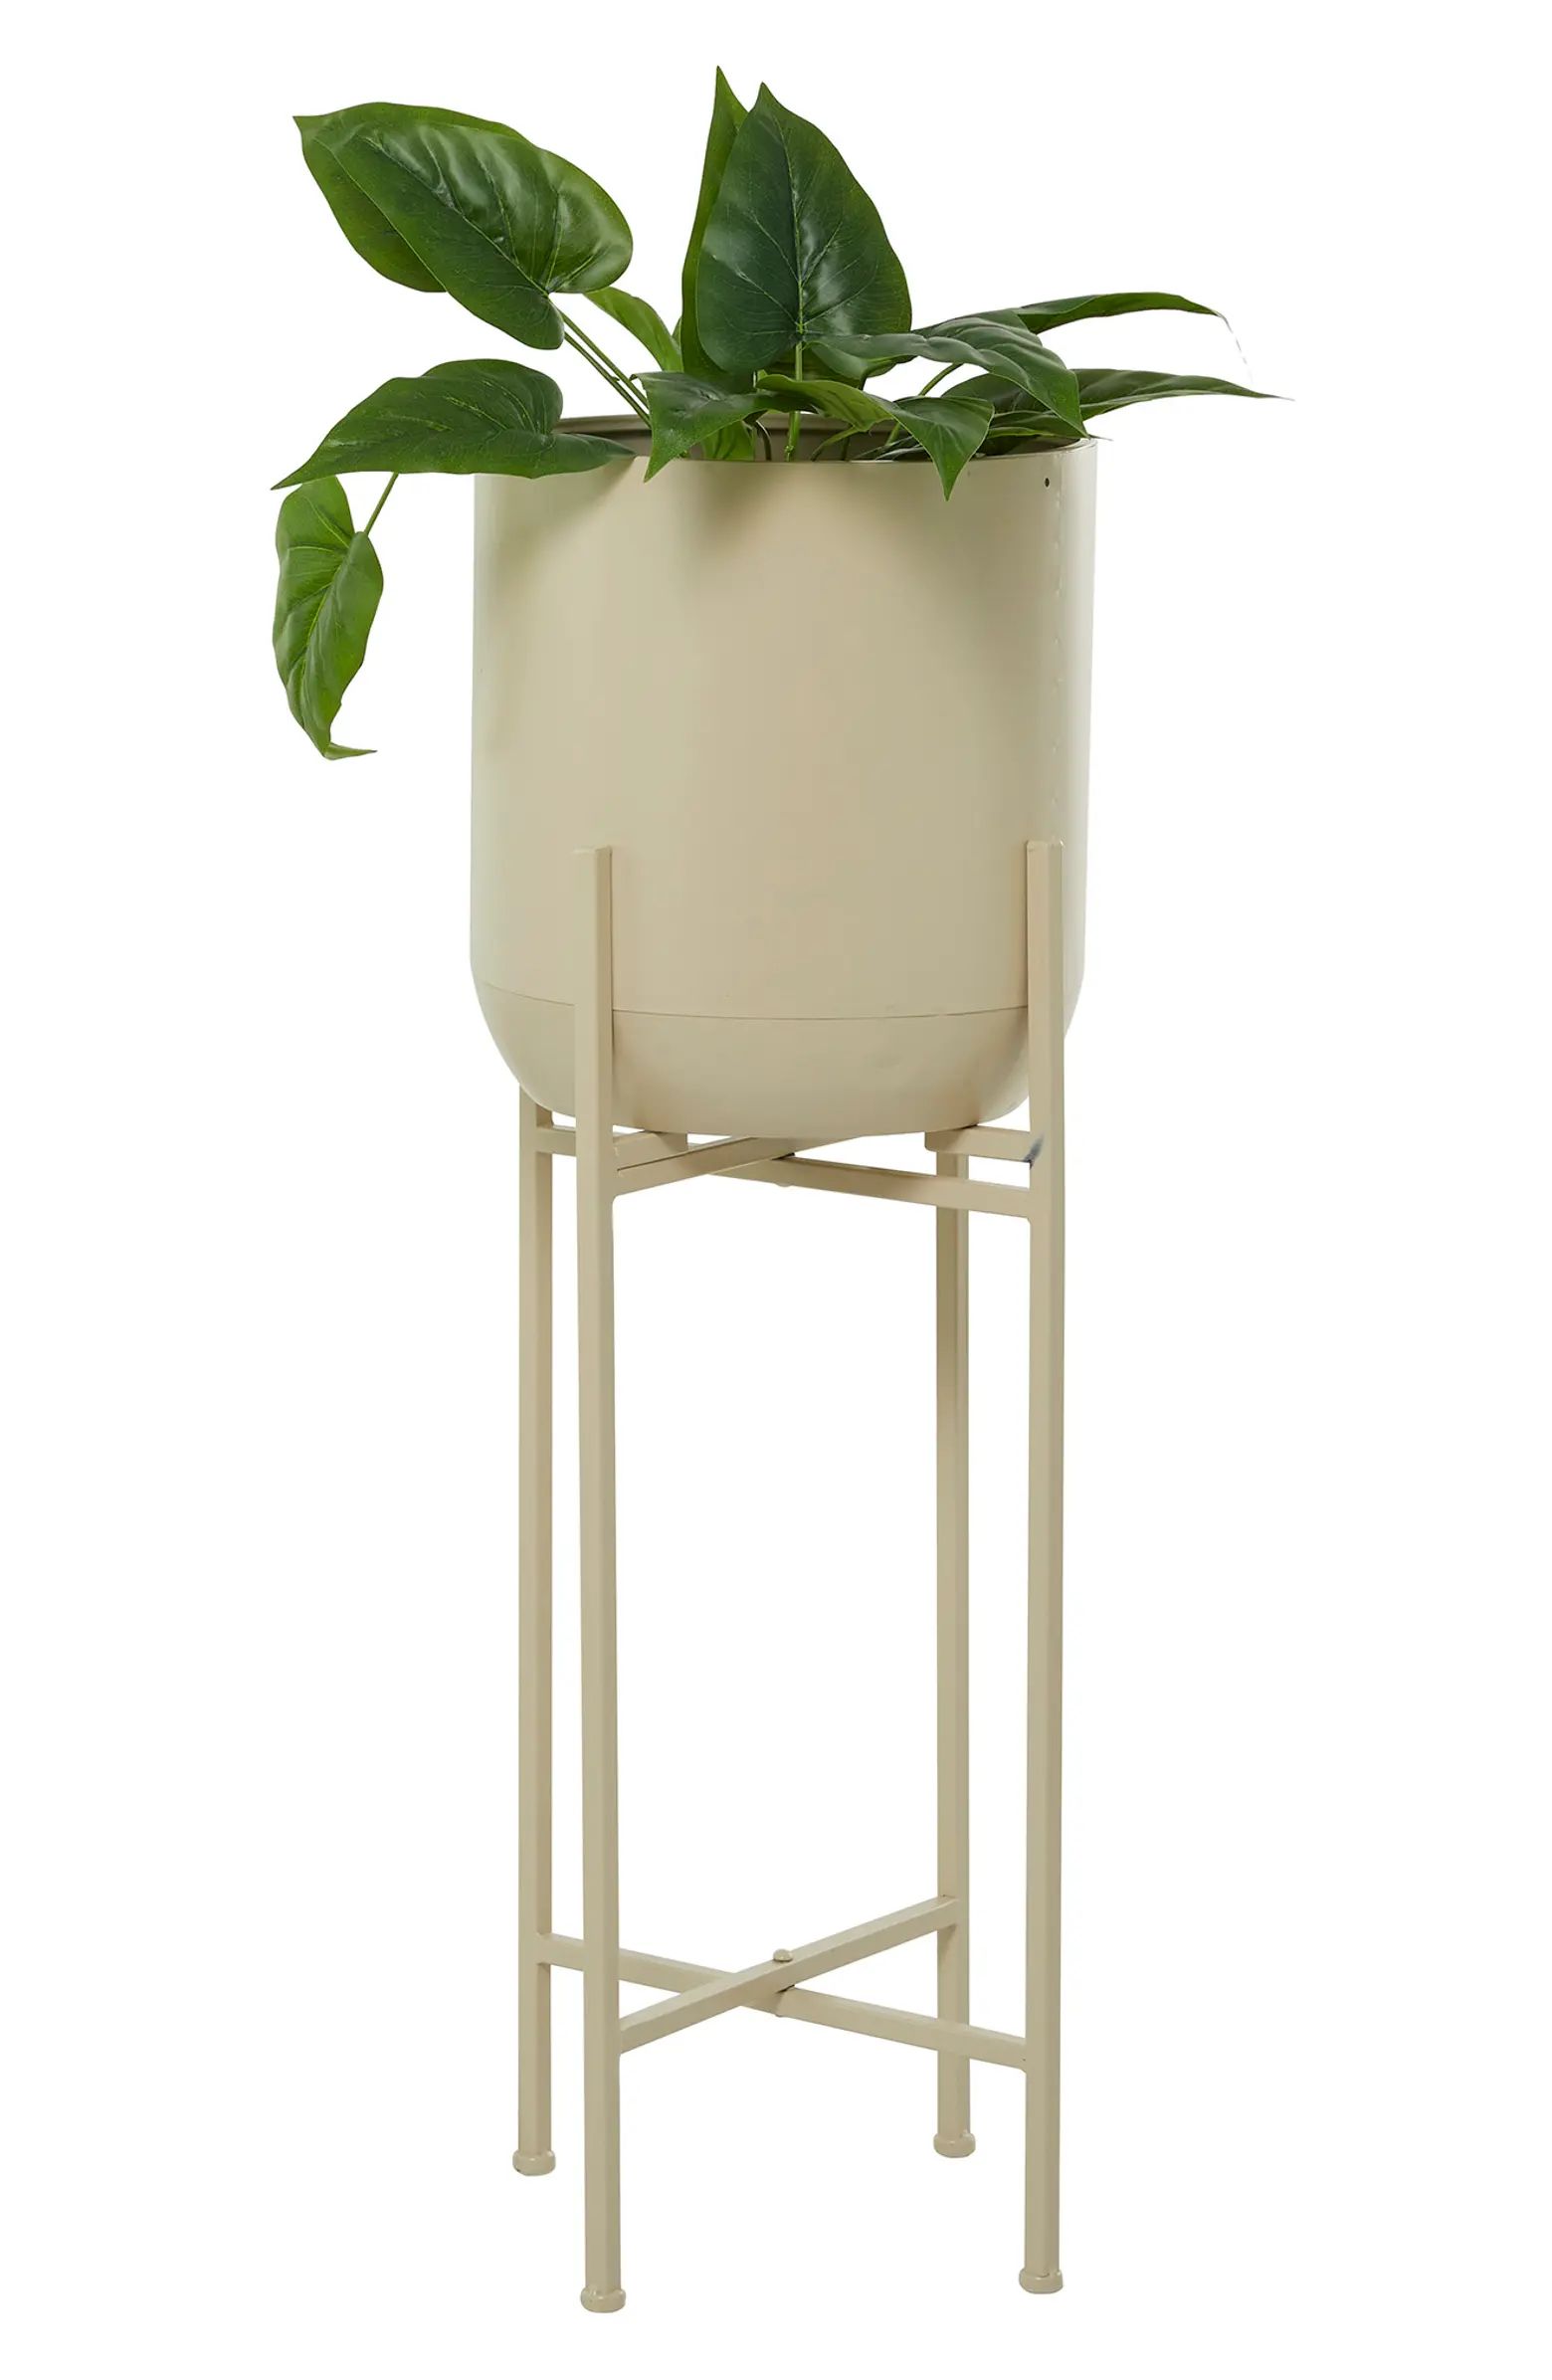 Beige Metal Modern Planter with Removable Stand | Nordstrom Rack